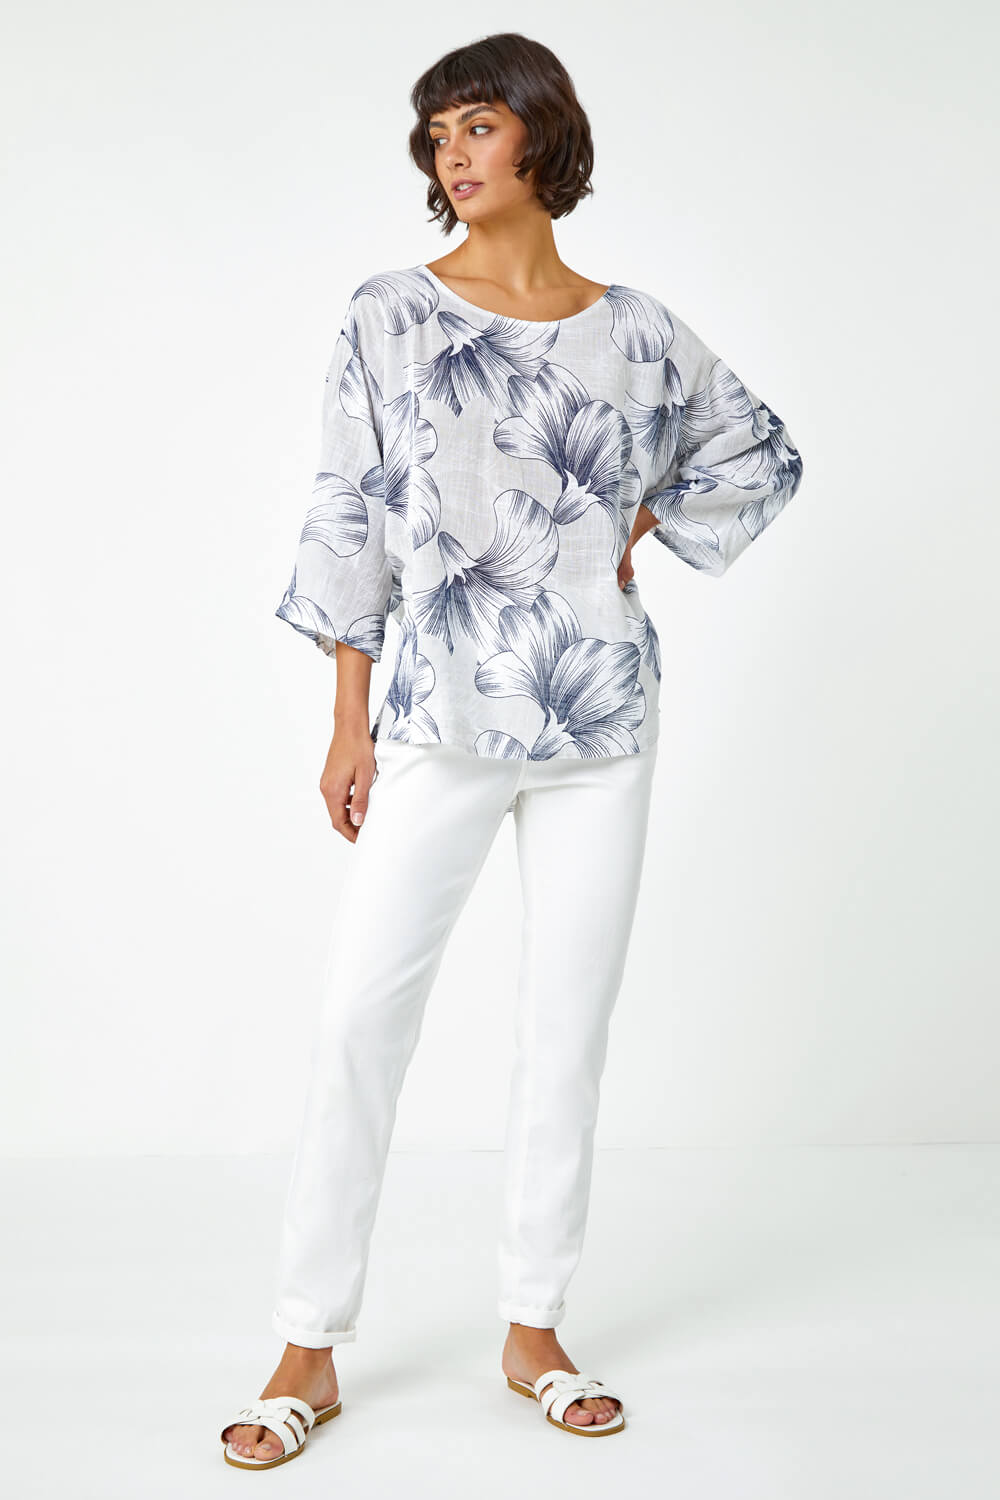 Grey Floral Print Cotton Tunic Top, Image 4 of 5